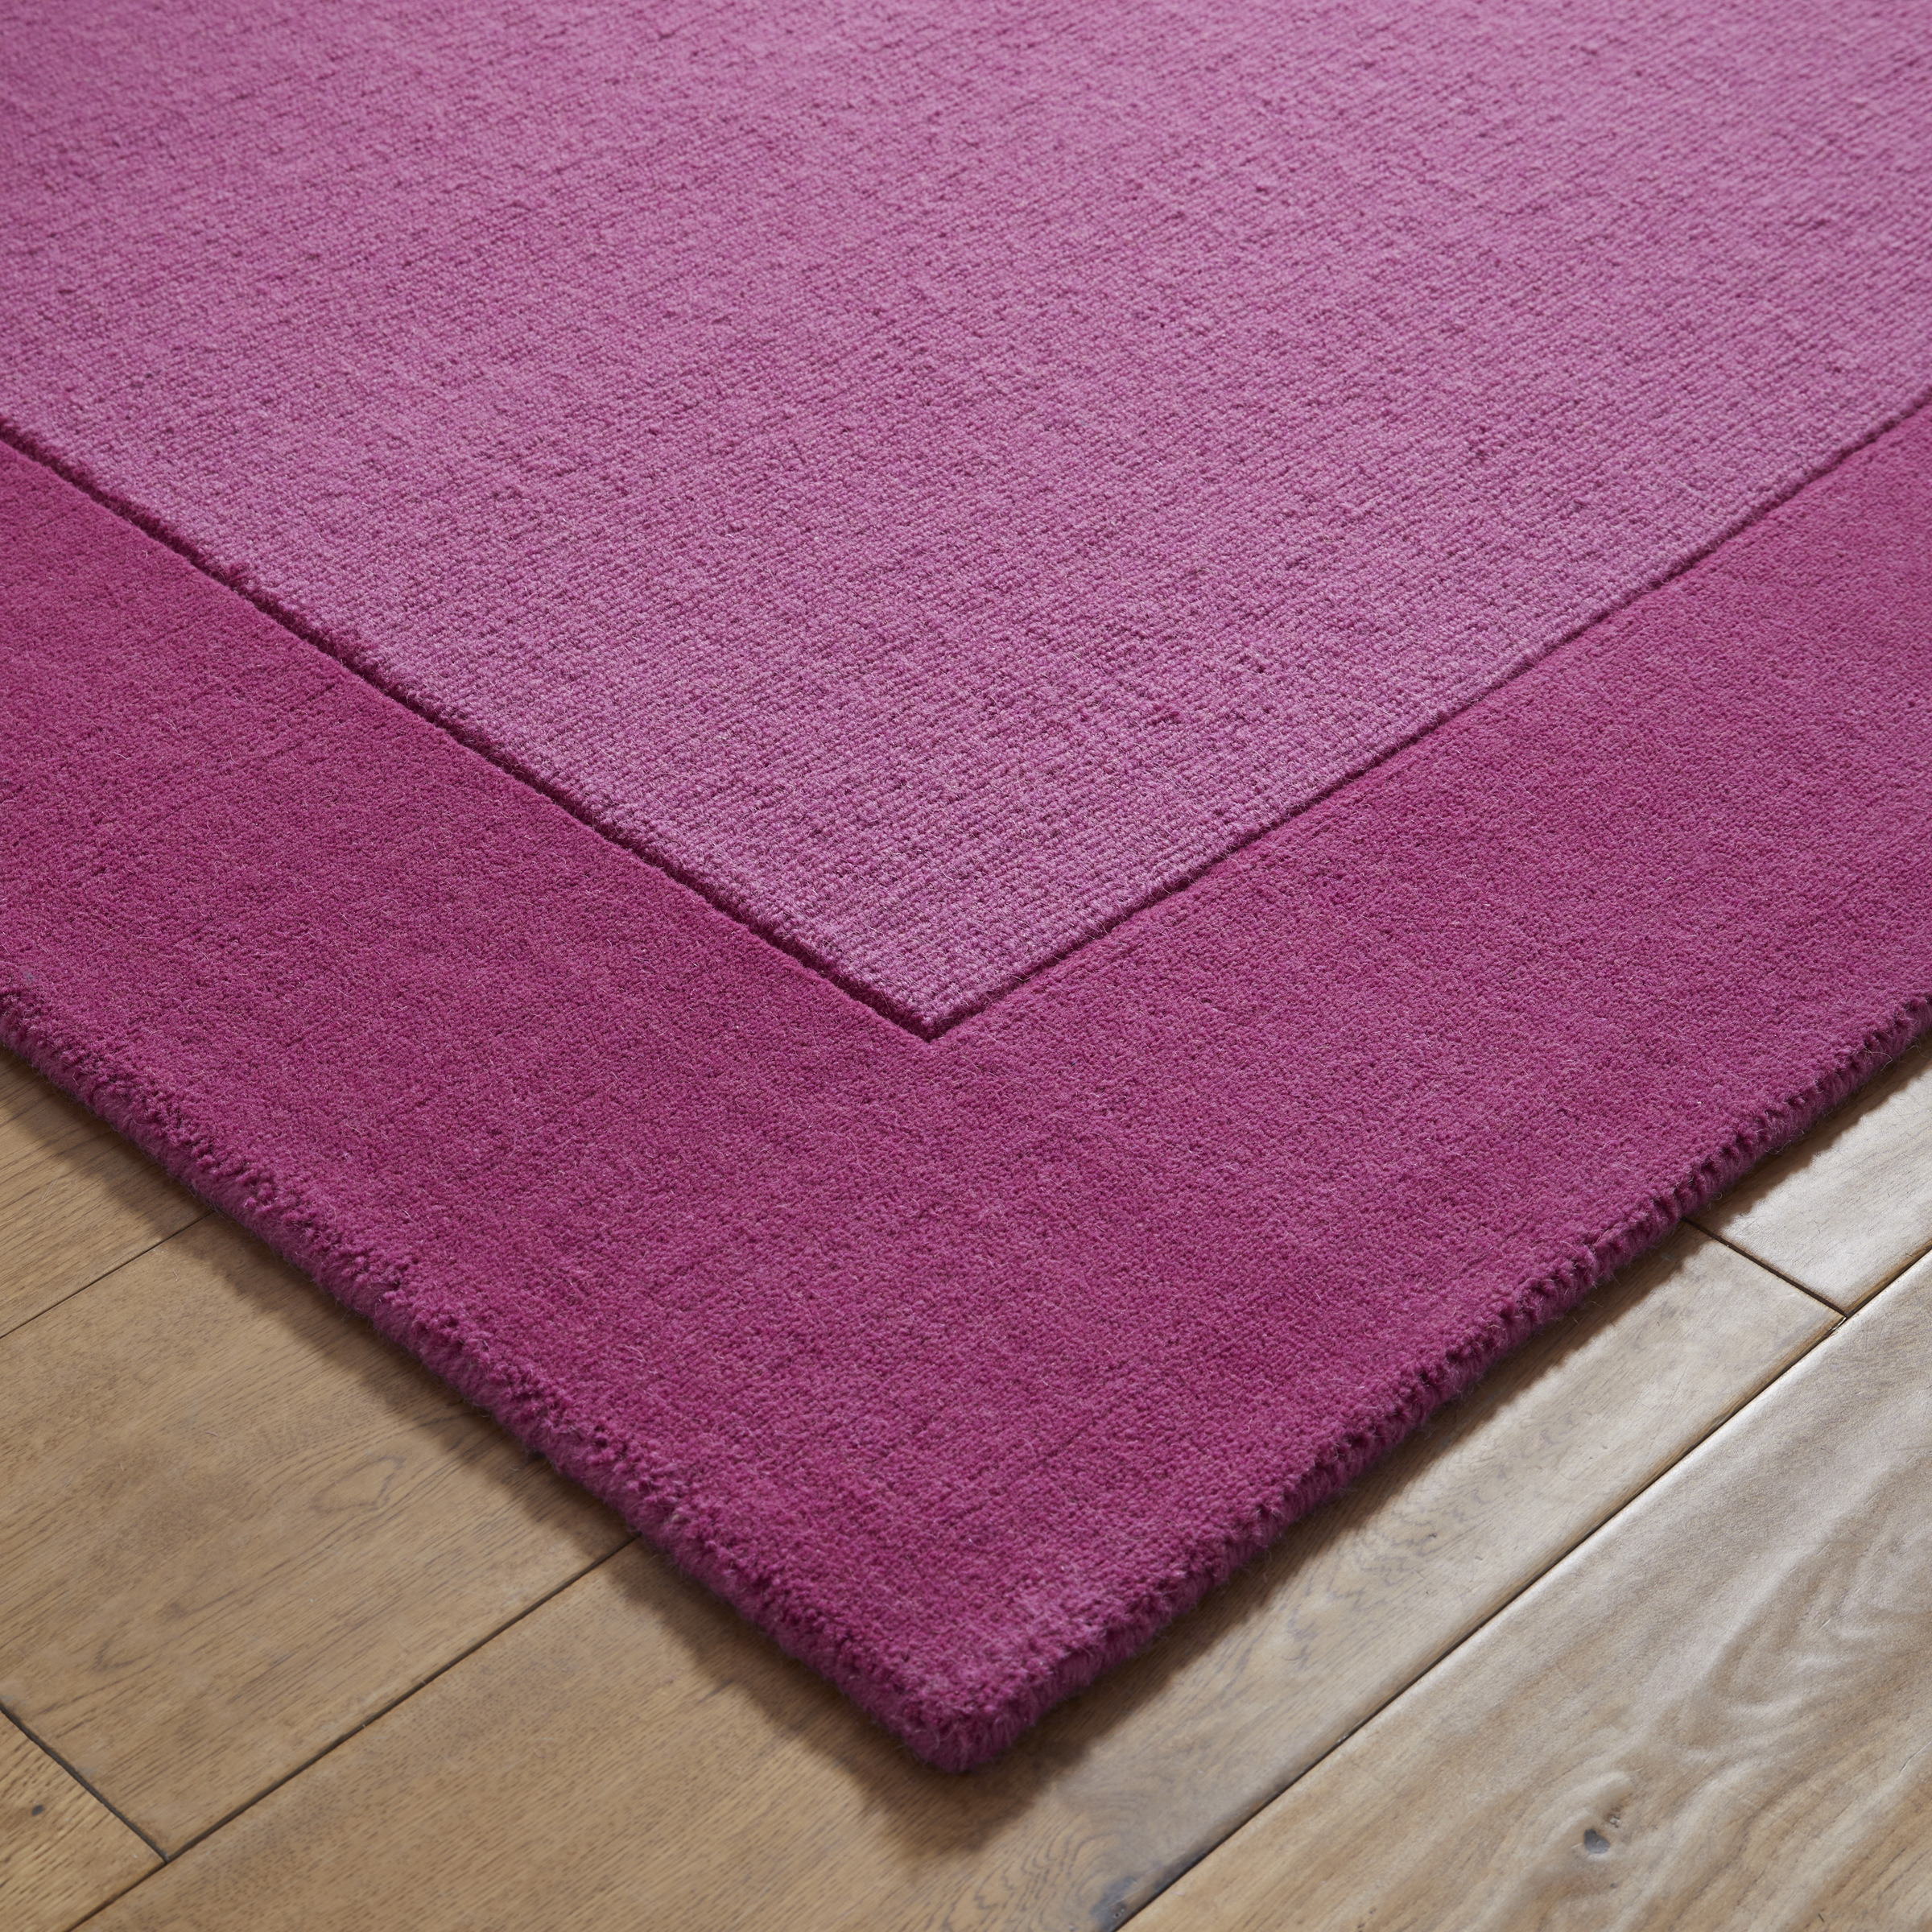 Colours Pink  120cm x 170cm Wool UK Mainland Free Shipping